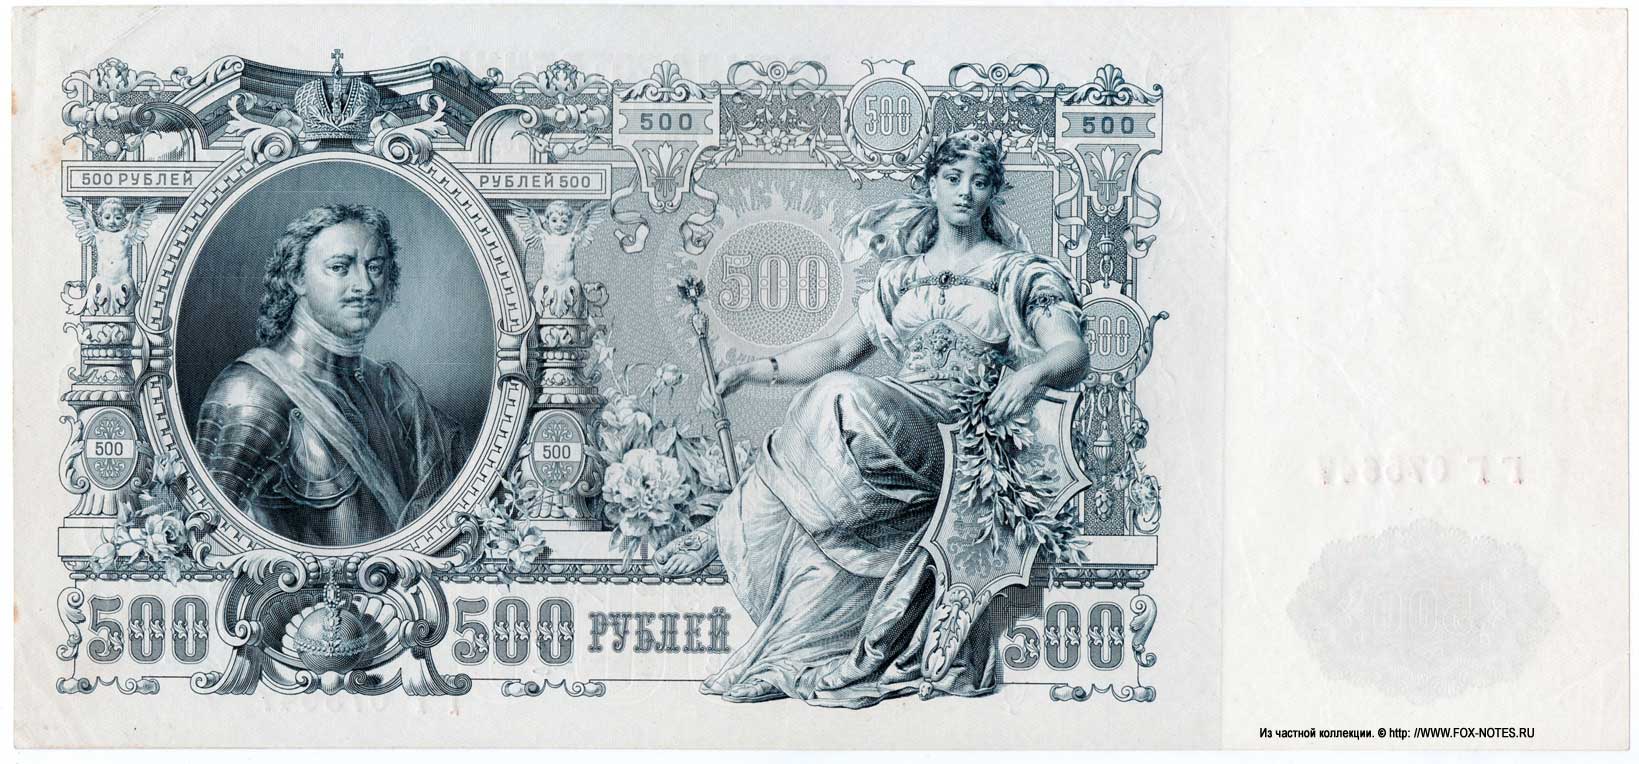 Russian Empire State Credit bank note 500 ruble 1912